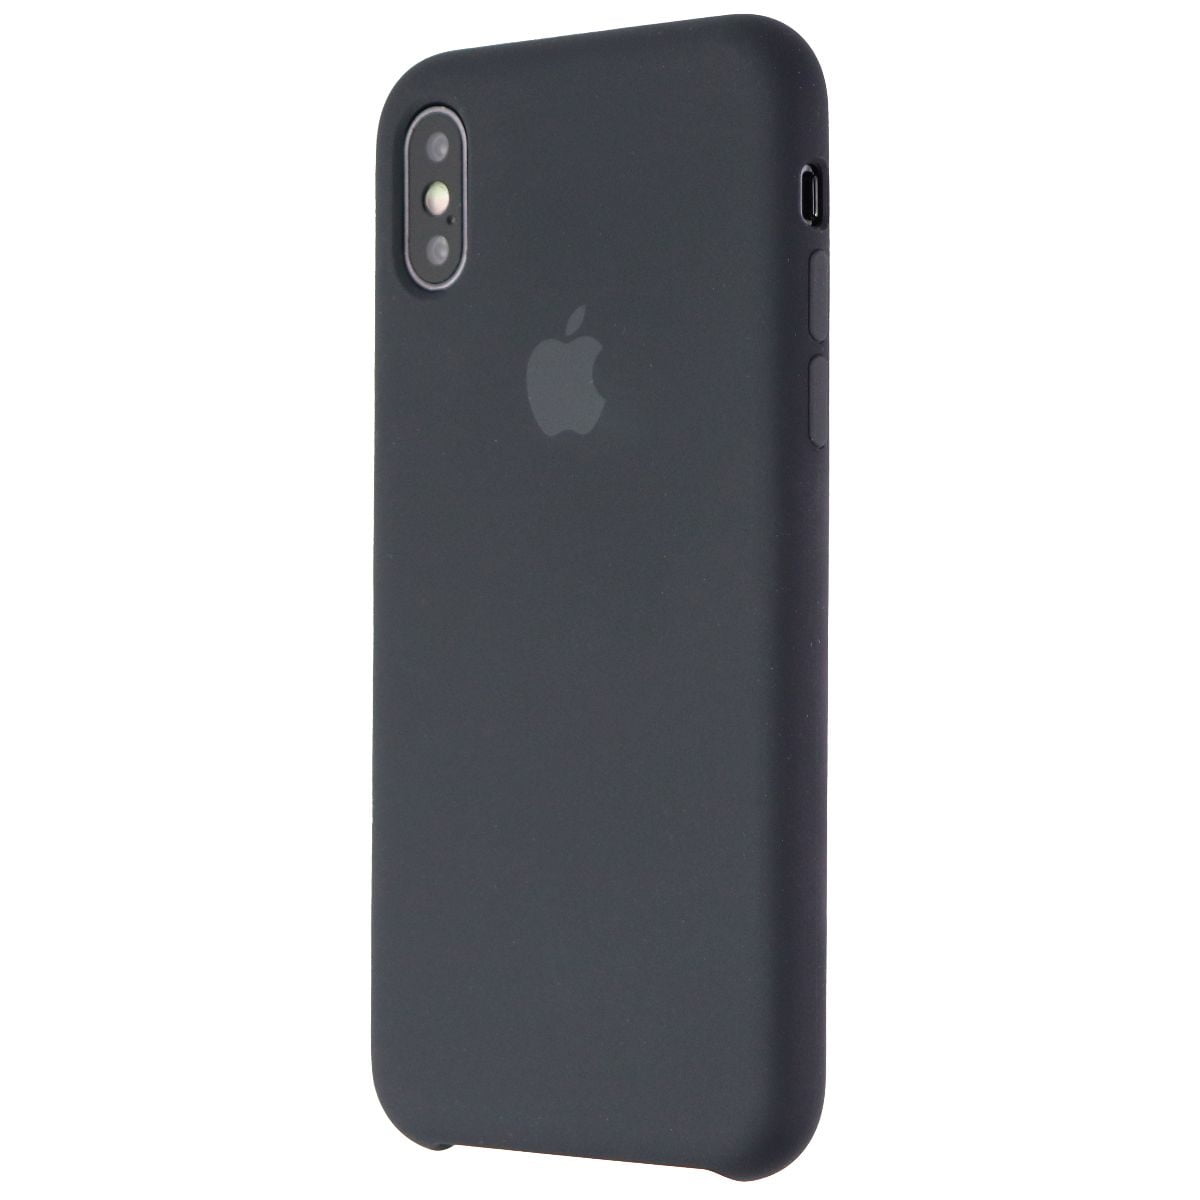 Apple Official Silicone Case for Apple iPhone Xs & iPhone X Smartphones - Black (Refurbished)